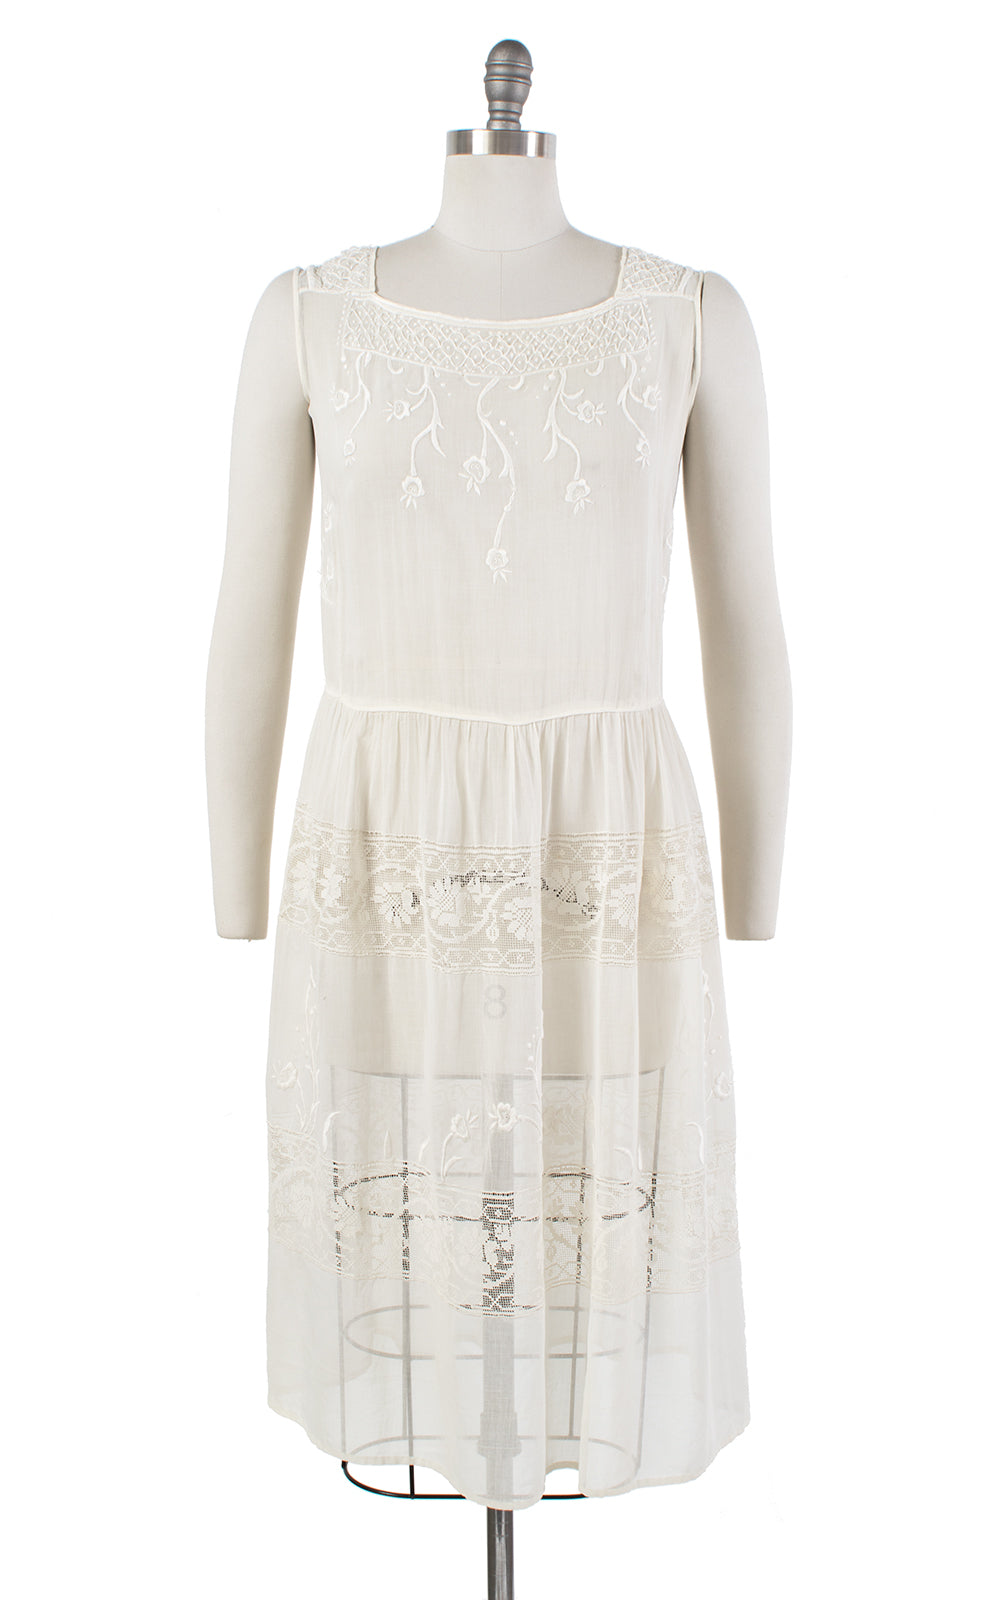 1920s Floral Embroidered Sheer Cotton Voile Summer Dress | small ...